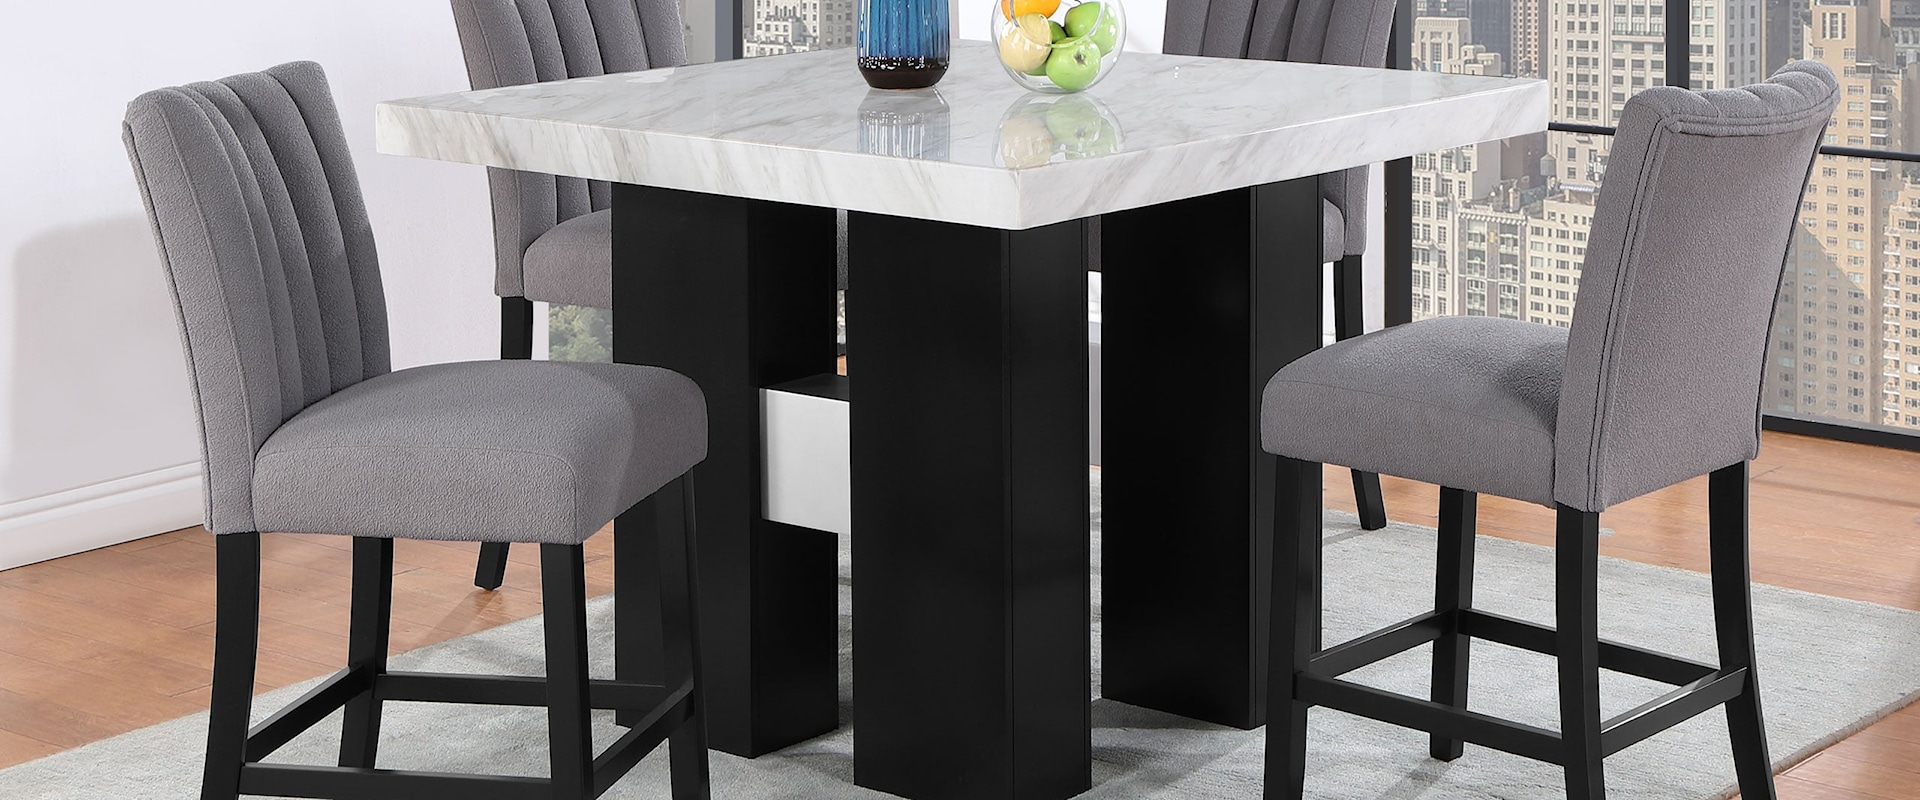 Contemporary Bar Table with White Faux Marble Top and 4 Bar Stools